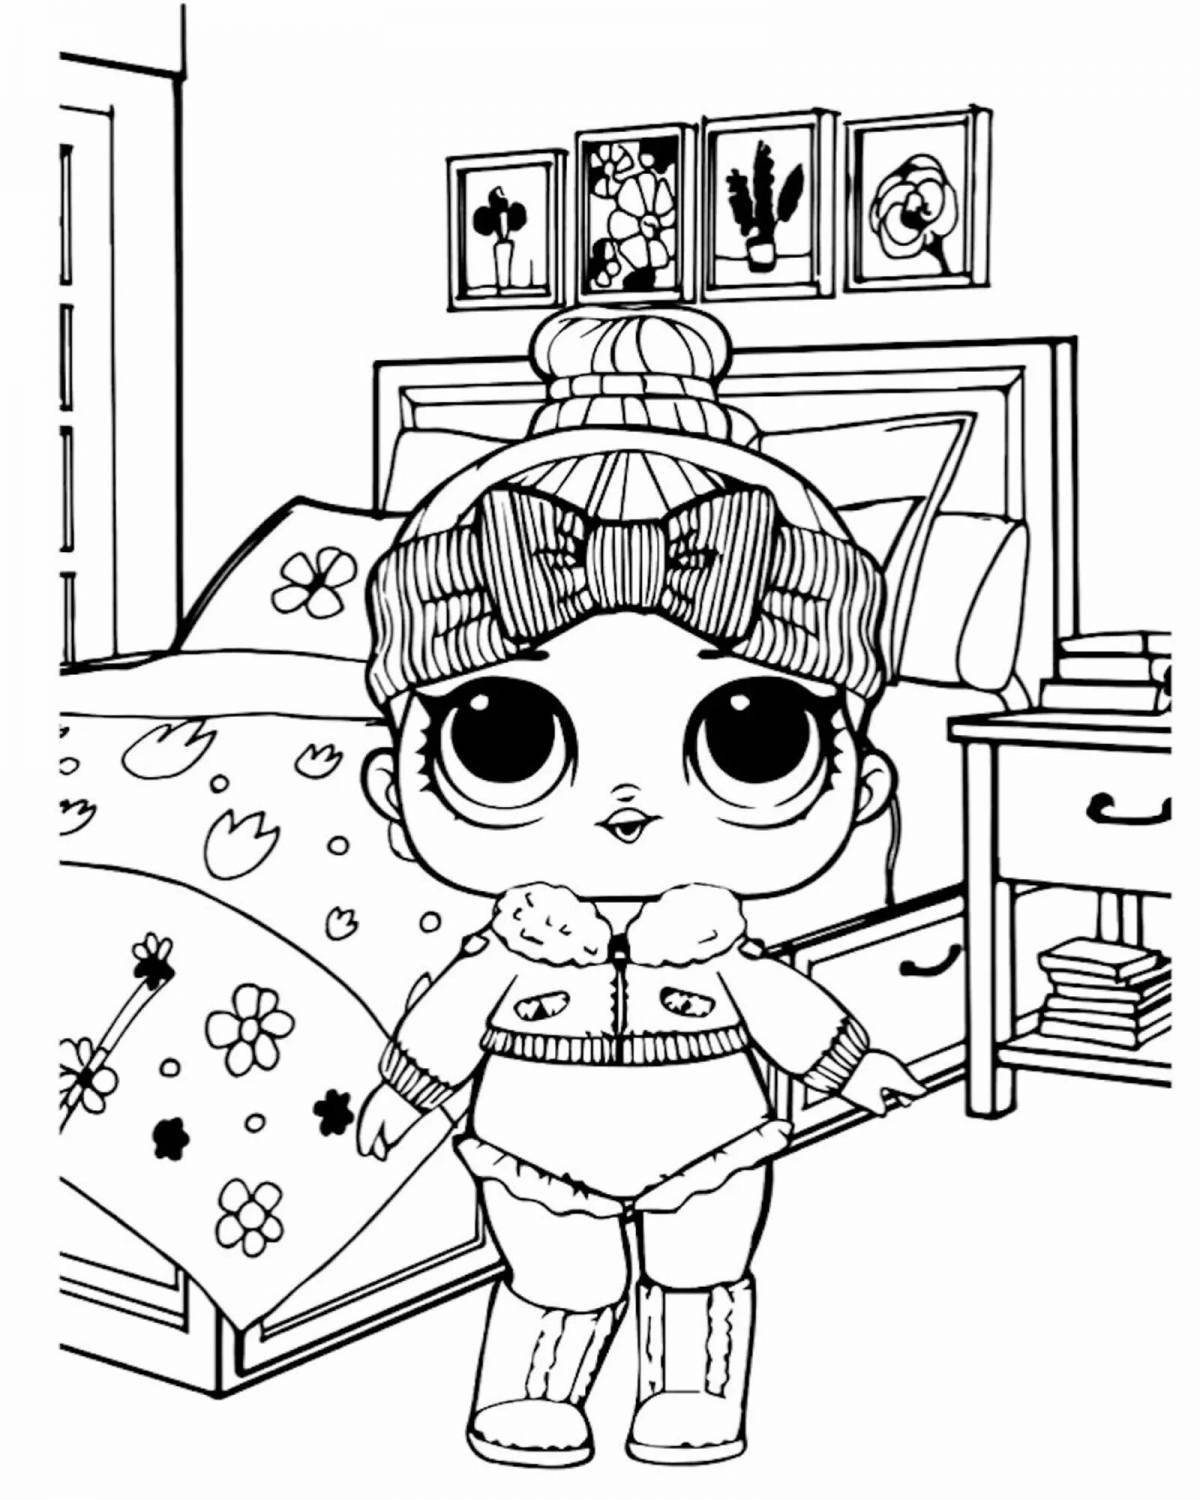 Lovely lol doll house coloring book for girls